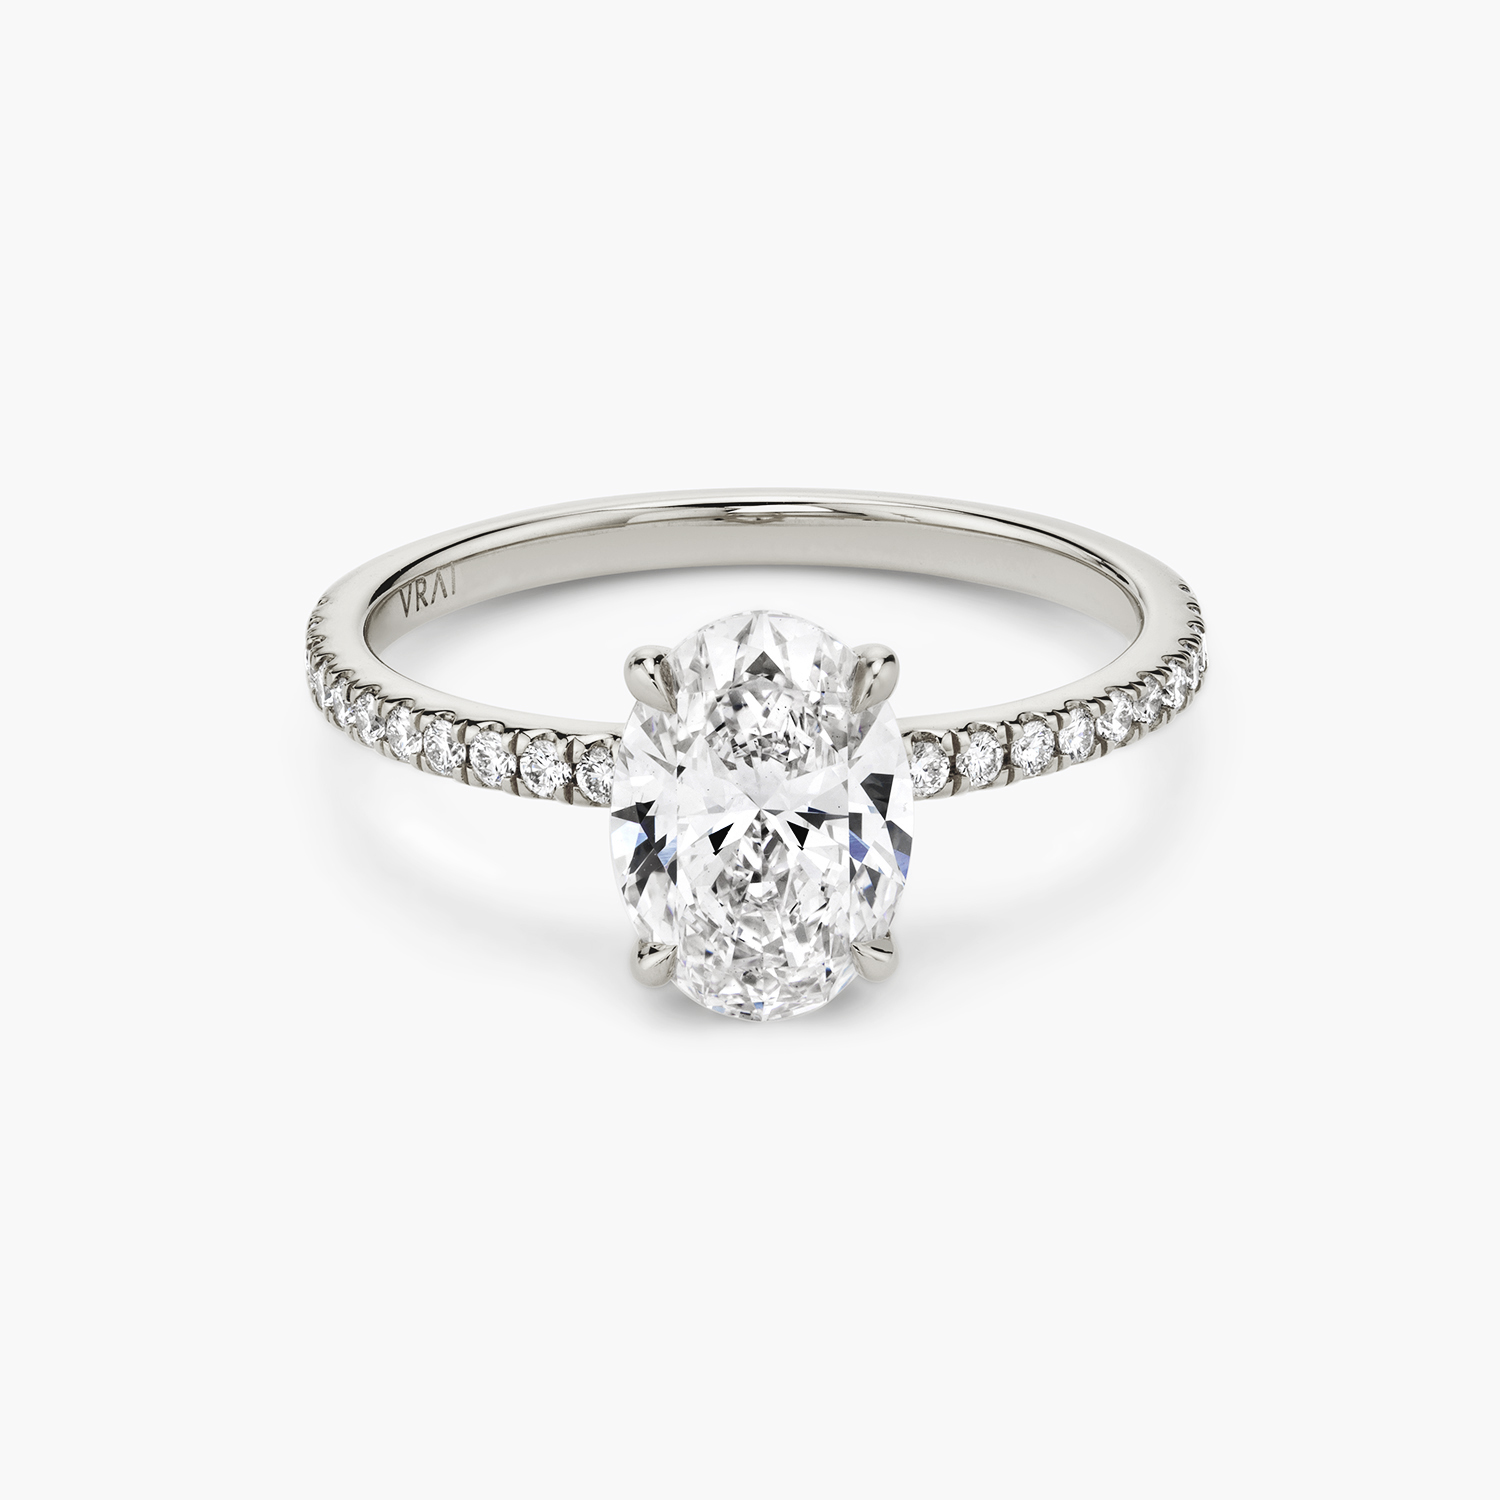 CLASSIC ENGAGEMENT RING STYLES